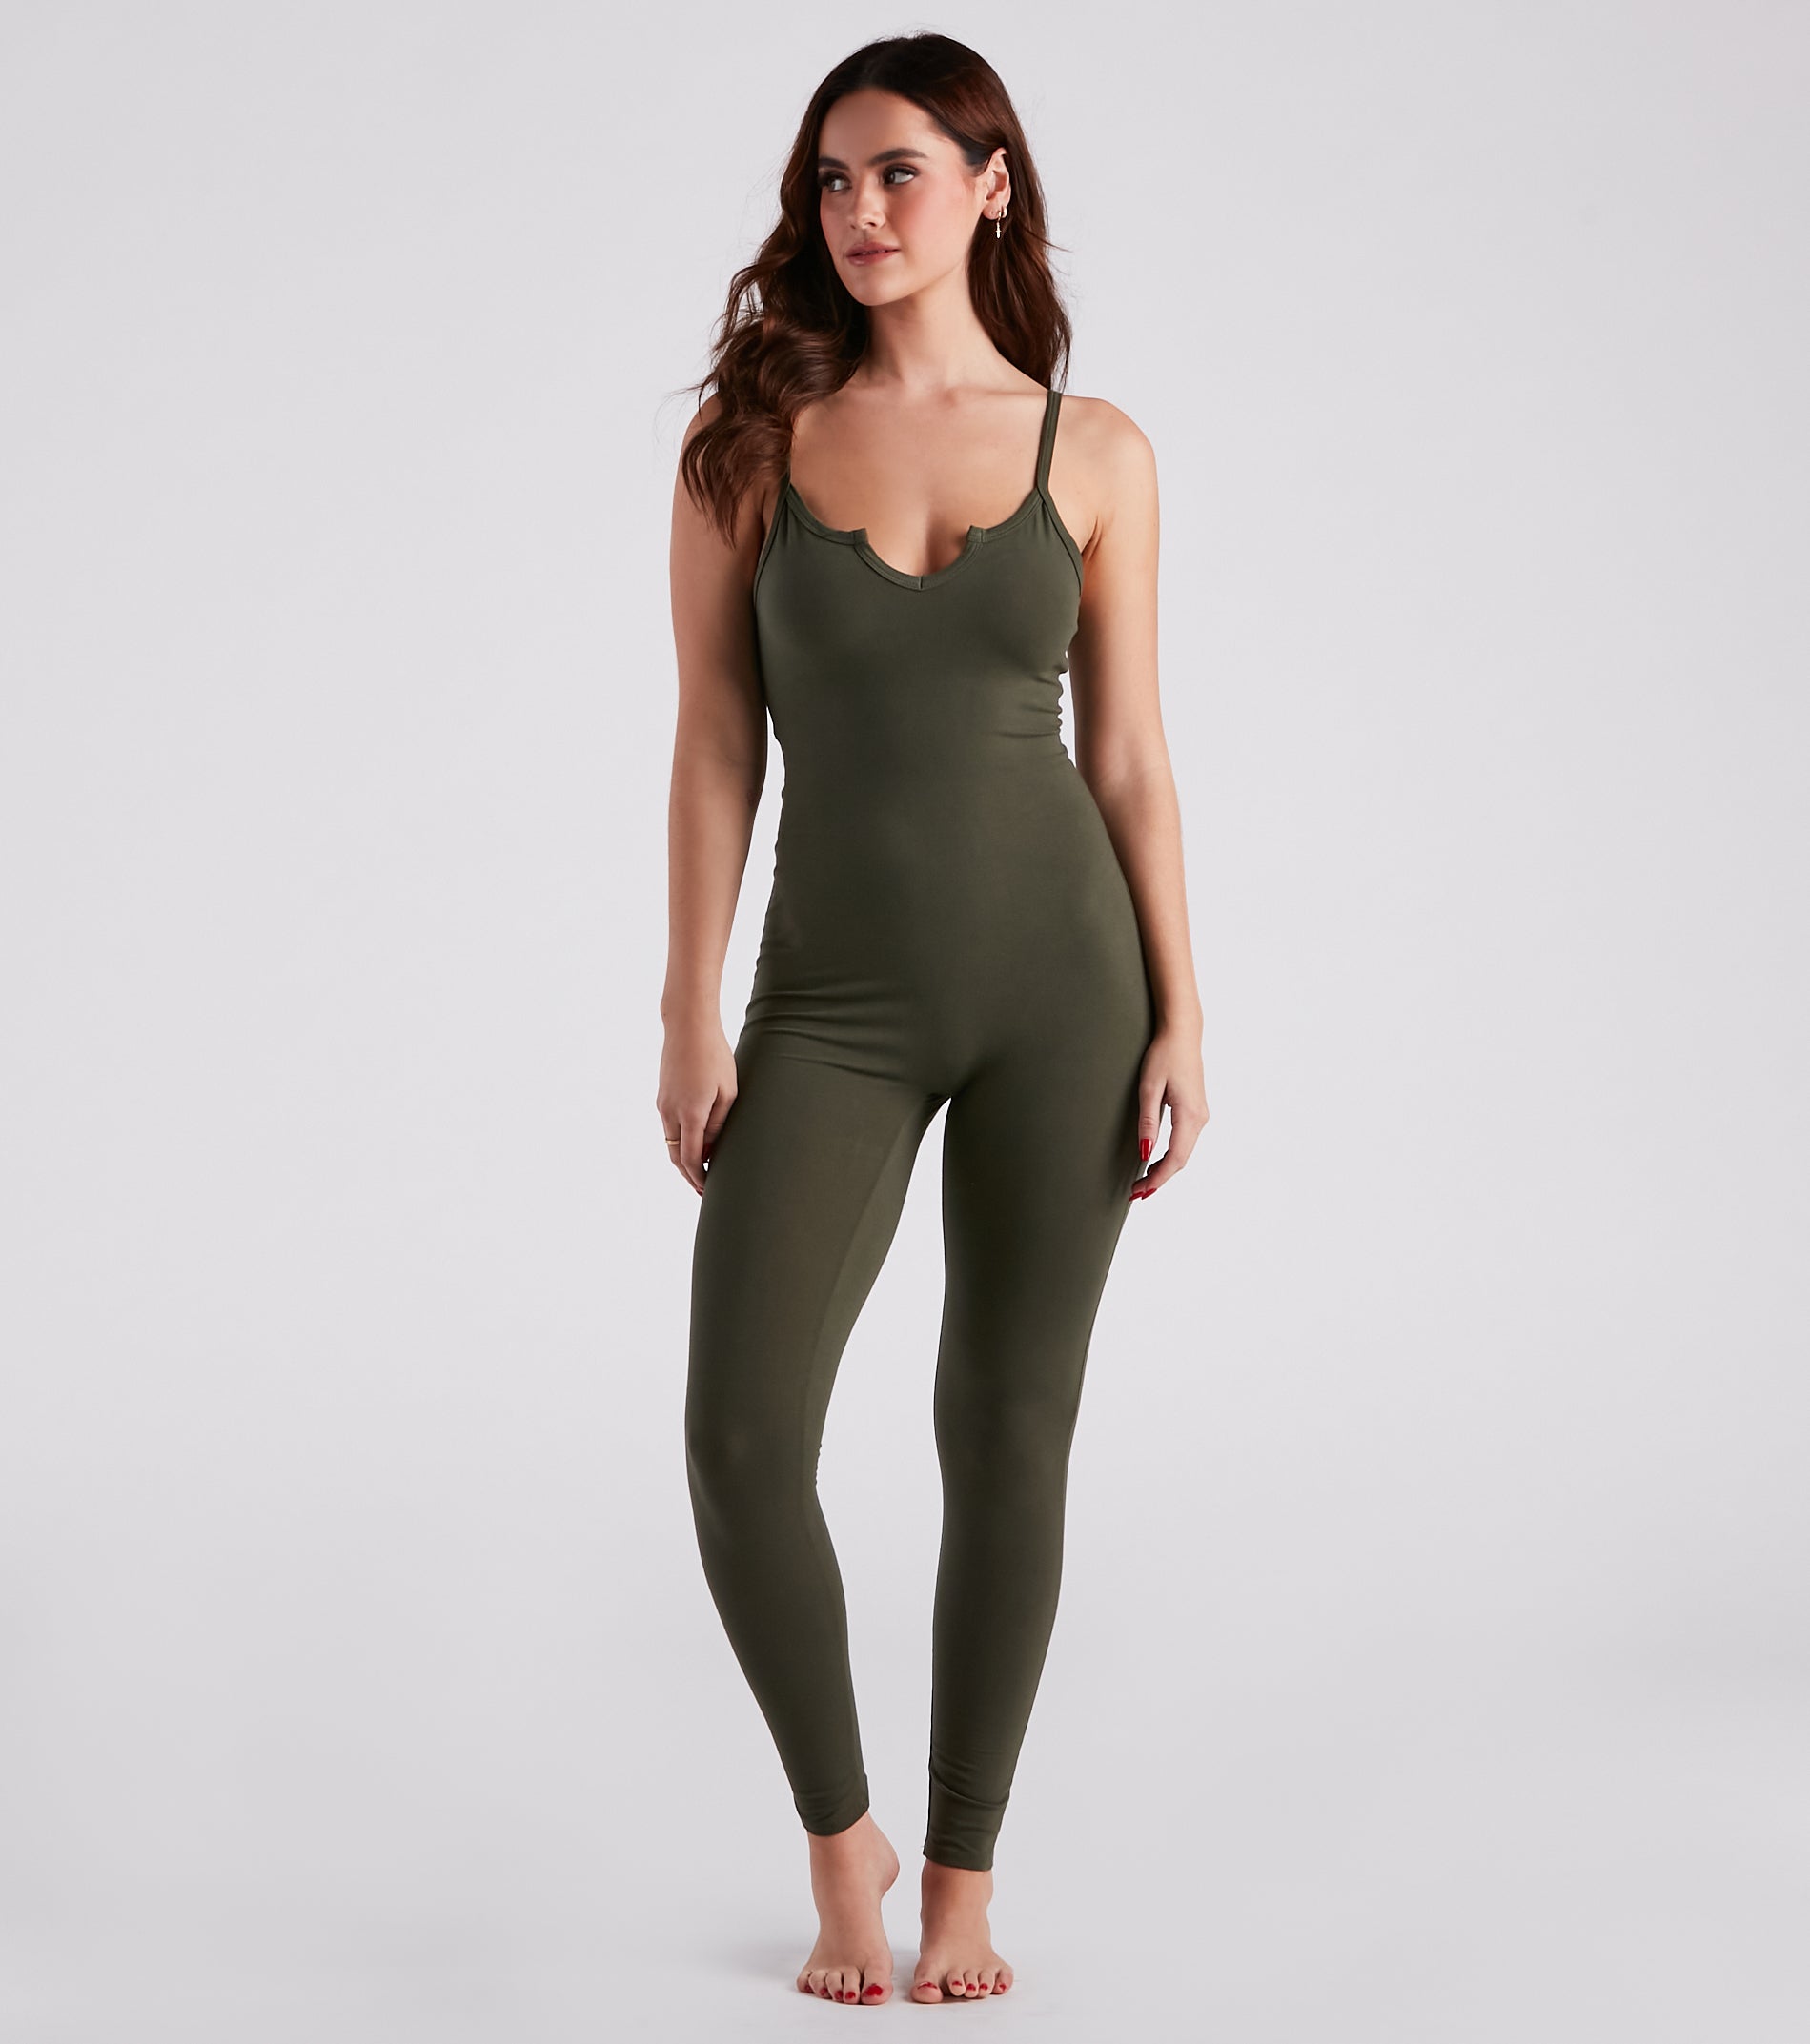 All The Comfy Vibes Sleeveless Catsuit